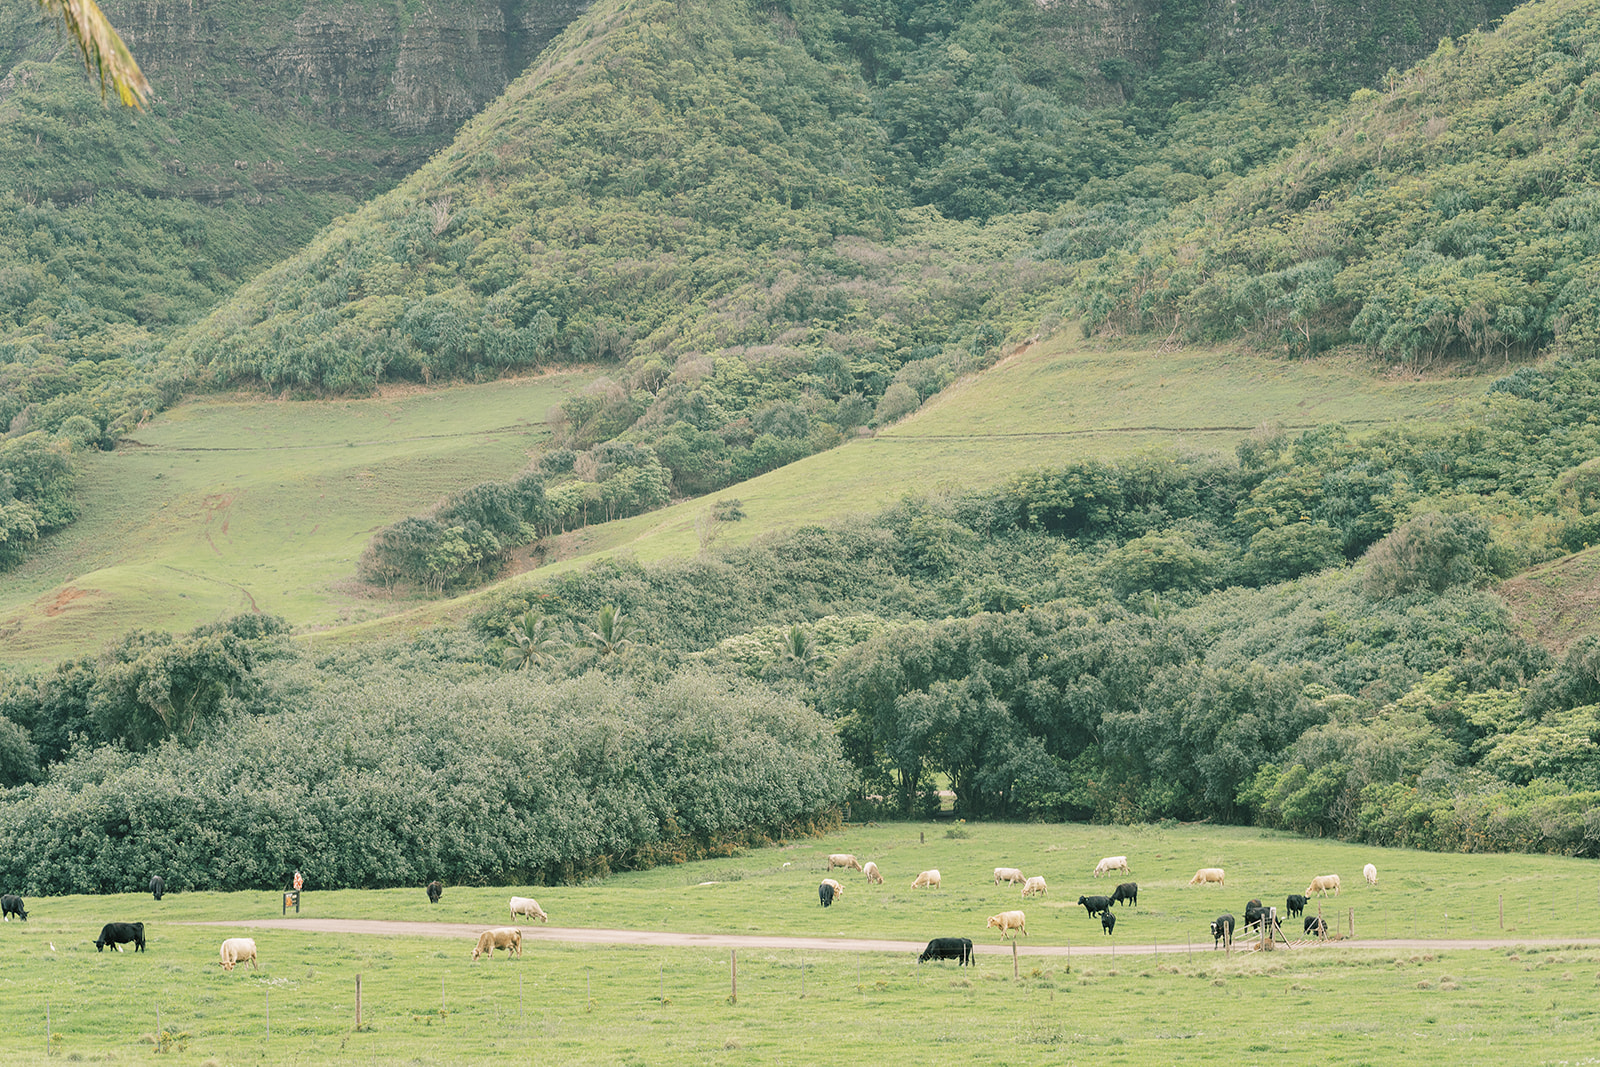 A group of cows grazing on a green field at Kualoa Ranch.